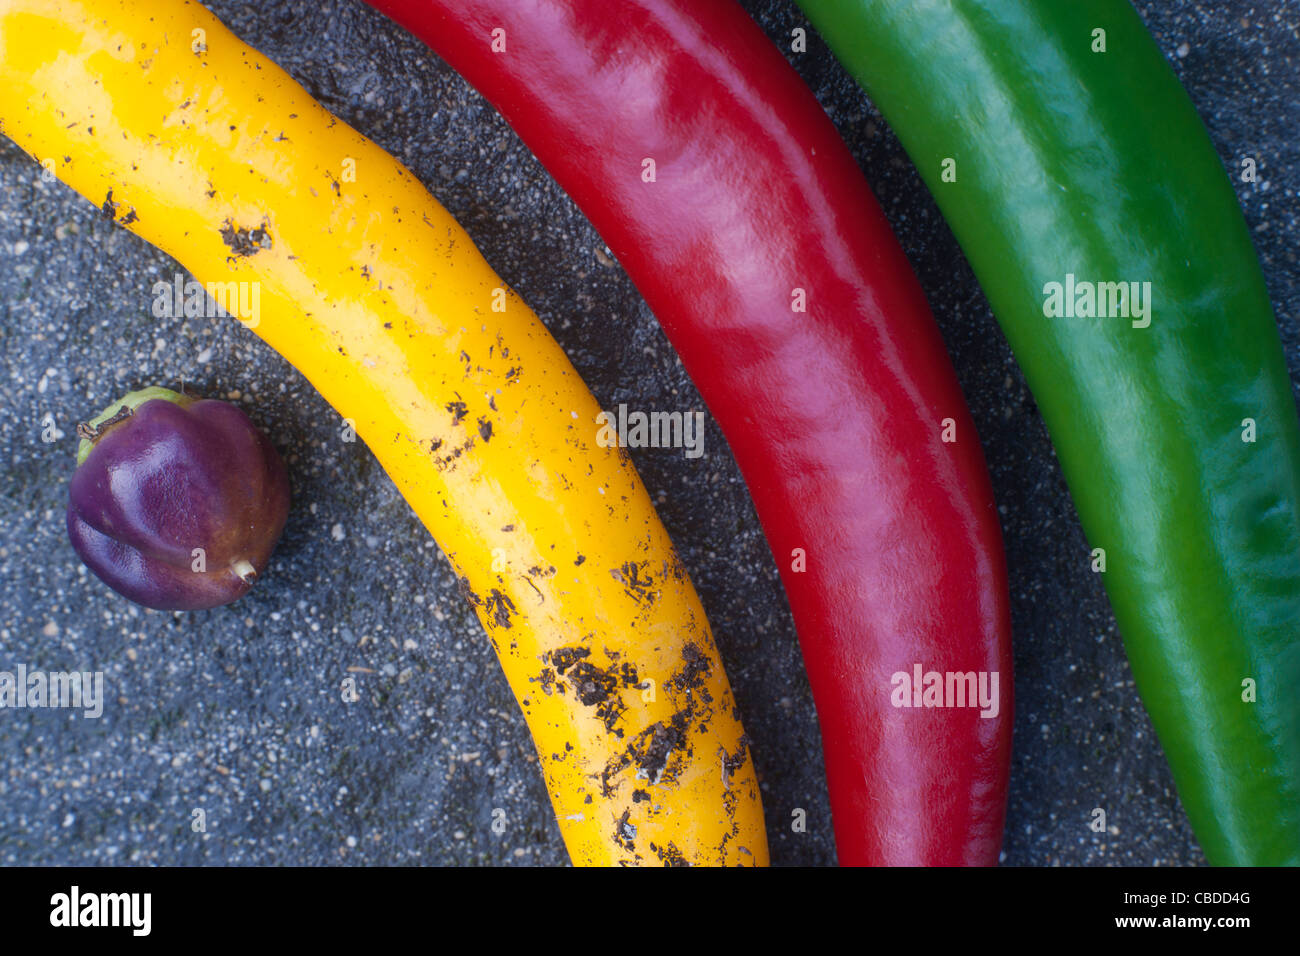 SONY DSC,4 different coloured chilli peppers on grey slate background, 3 long chilli peppers, one spherical chilli pepper Stock Photo